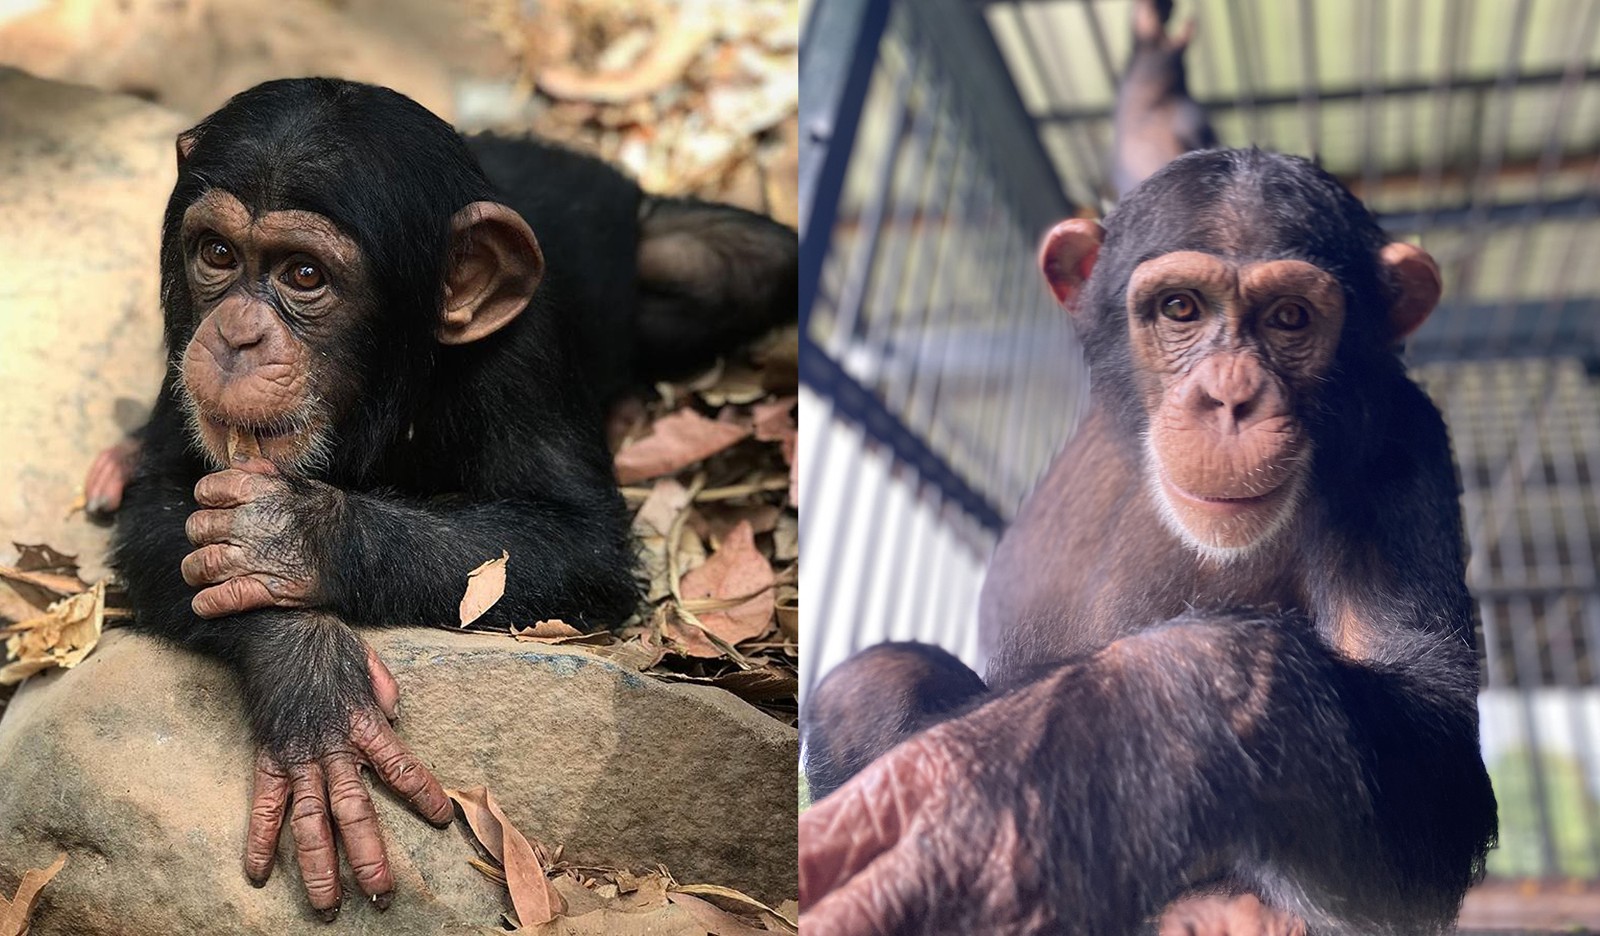 Two photos of Simao side by side: Left shows him a year ago, right shows him happy and settled at the sanctuary